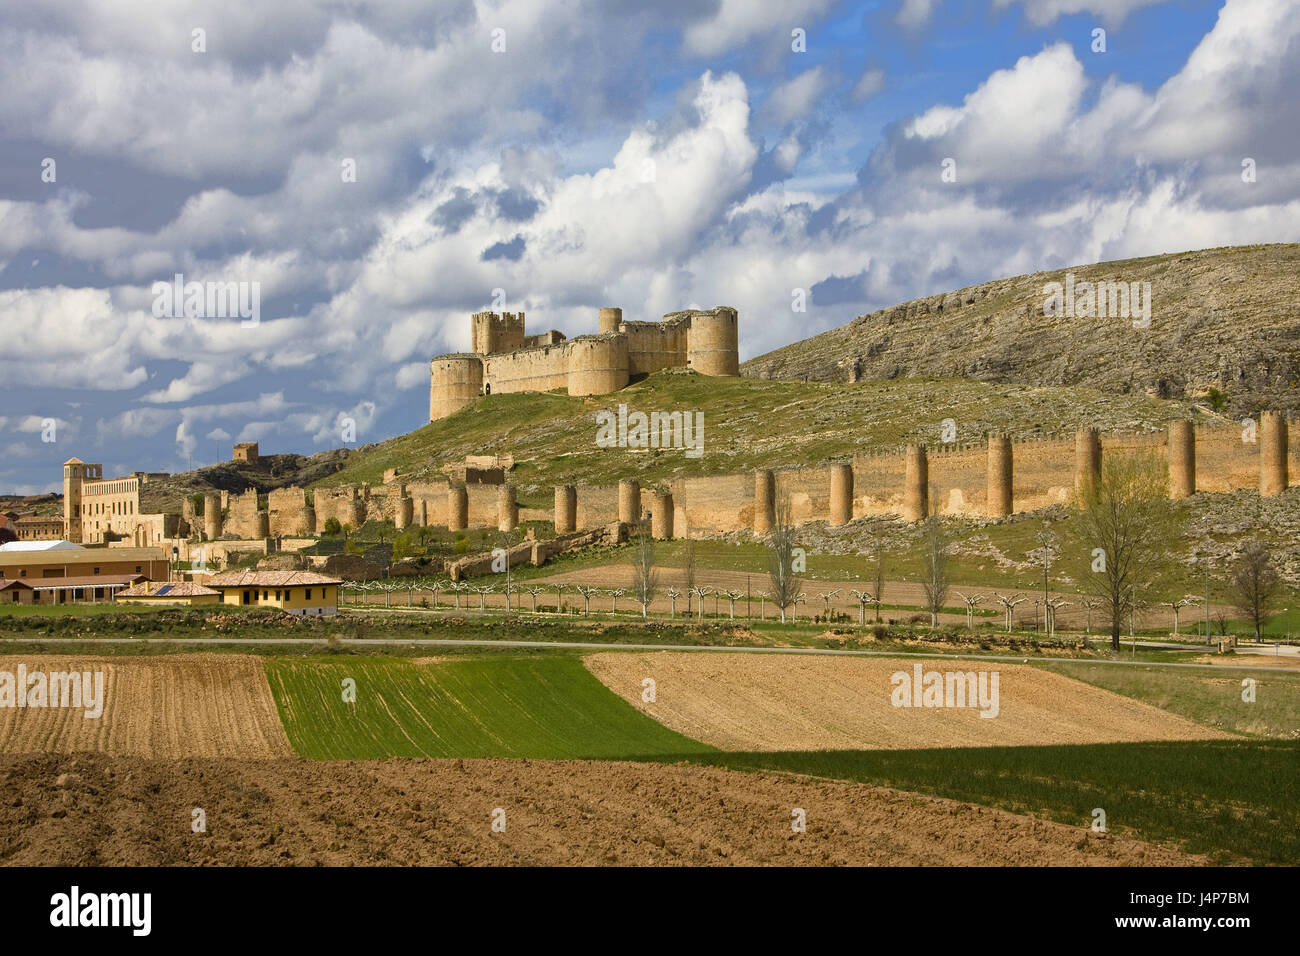 Spain, Castile, province of Soria, castle, cloudy sky, Kastilien-Leon, hill, fortress, defensive wall, field, place of interest, tourism, nobody, sky, grey, cloudies, Stock Photo